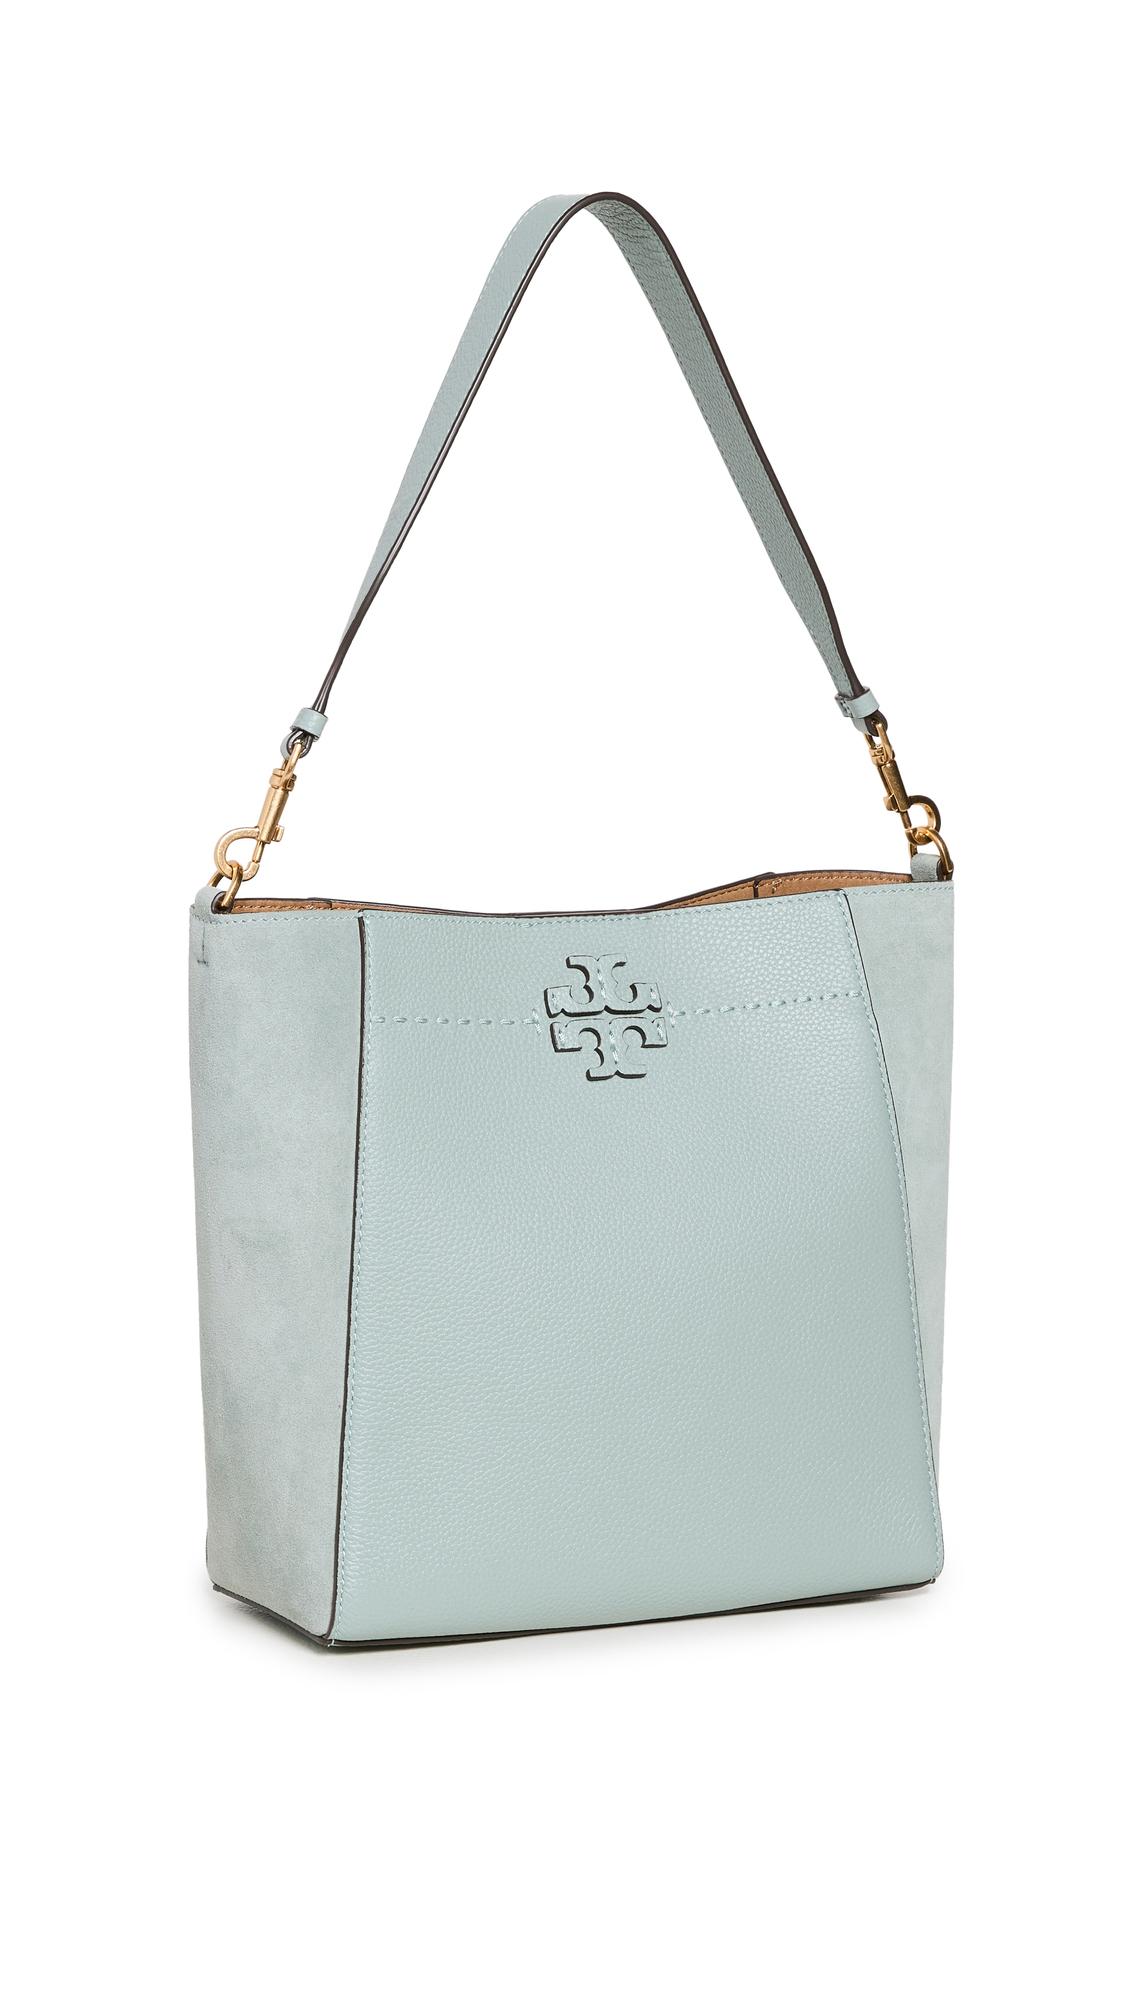 Tory Burch Leather Mcgraw Bucket Bag in Blue | Lyst